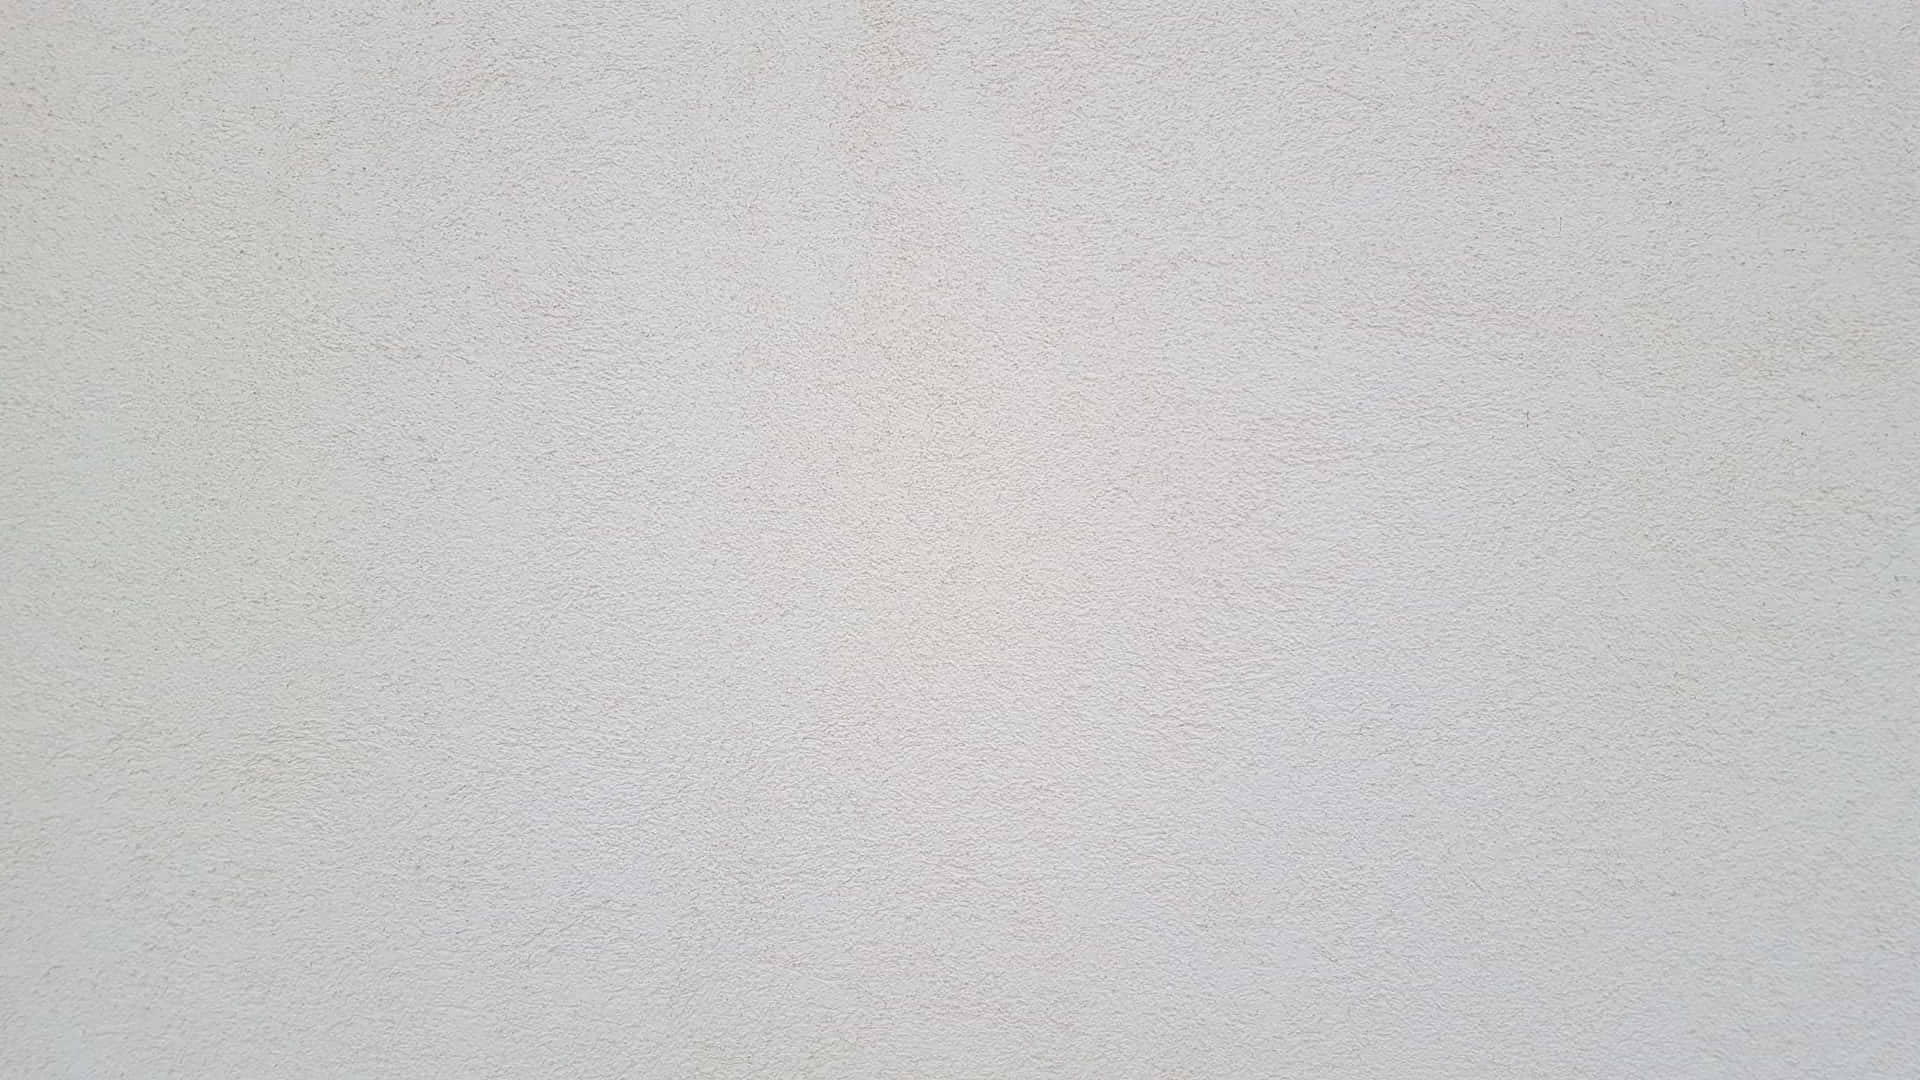 A White Wall With A White Paint On It